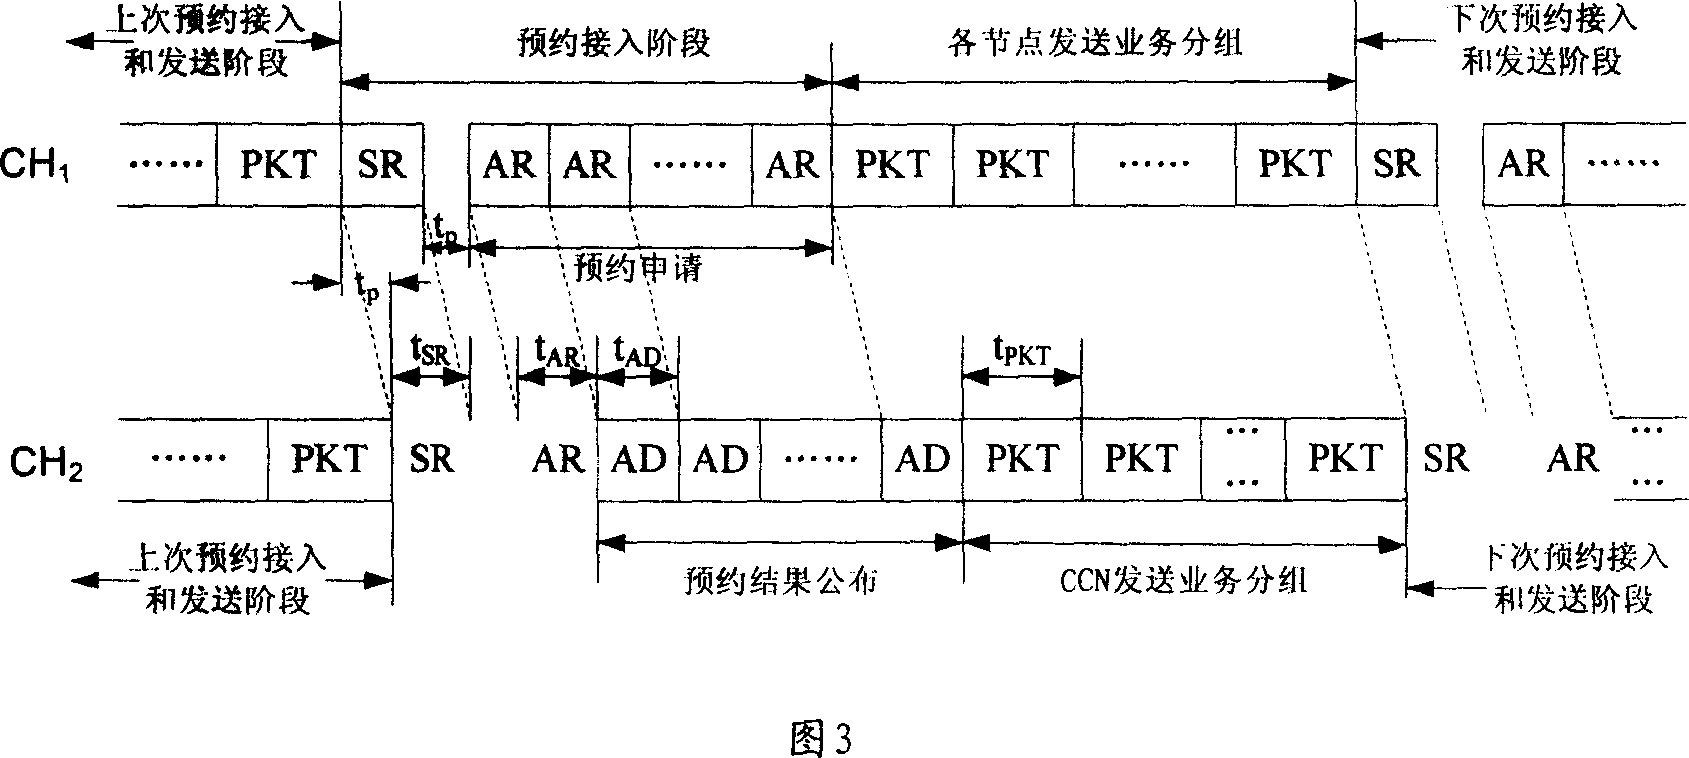 Fast precontract and line transmission multi-address access method